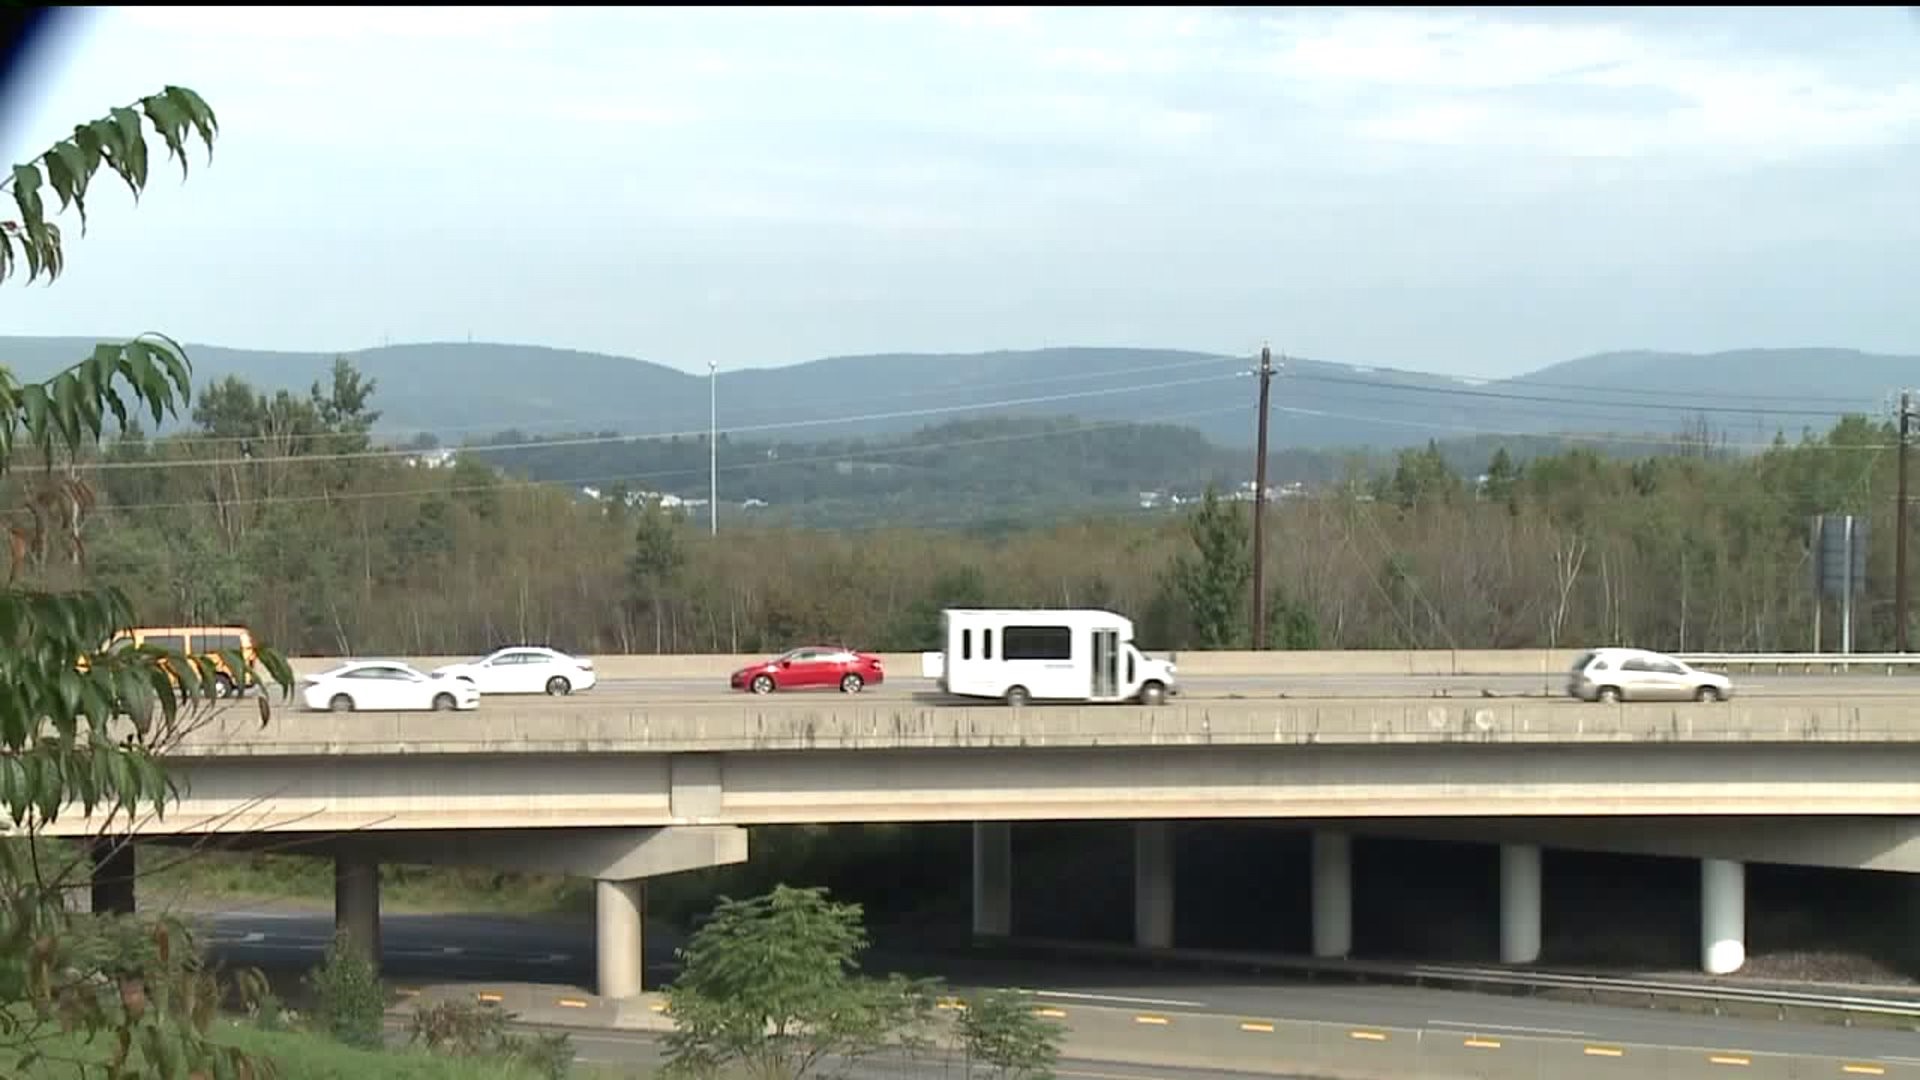 Grant Money to Improve Luzerne County Traffic Congestion